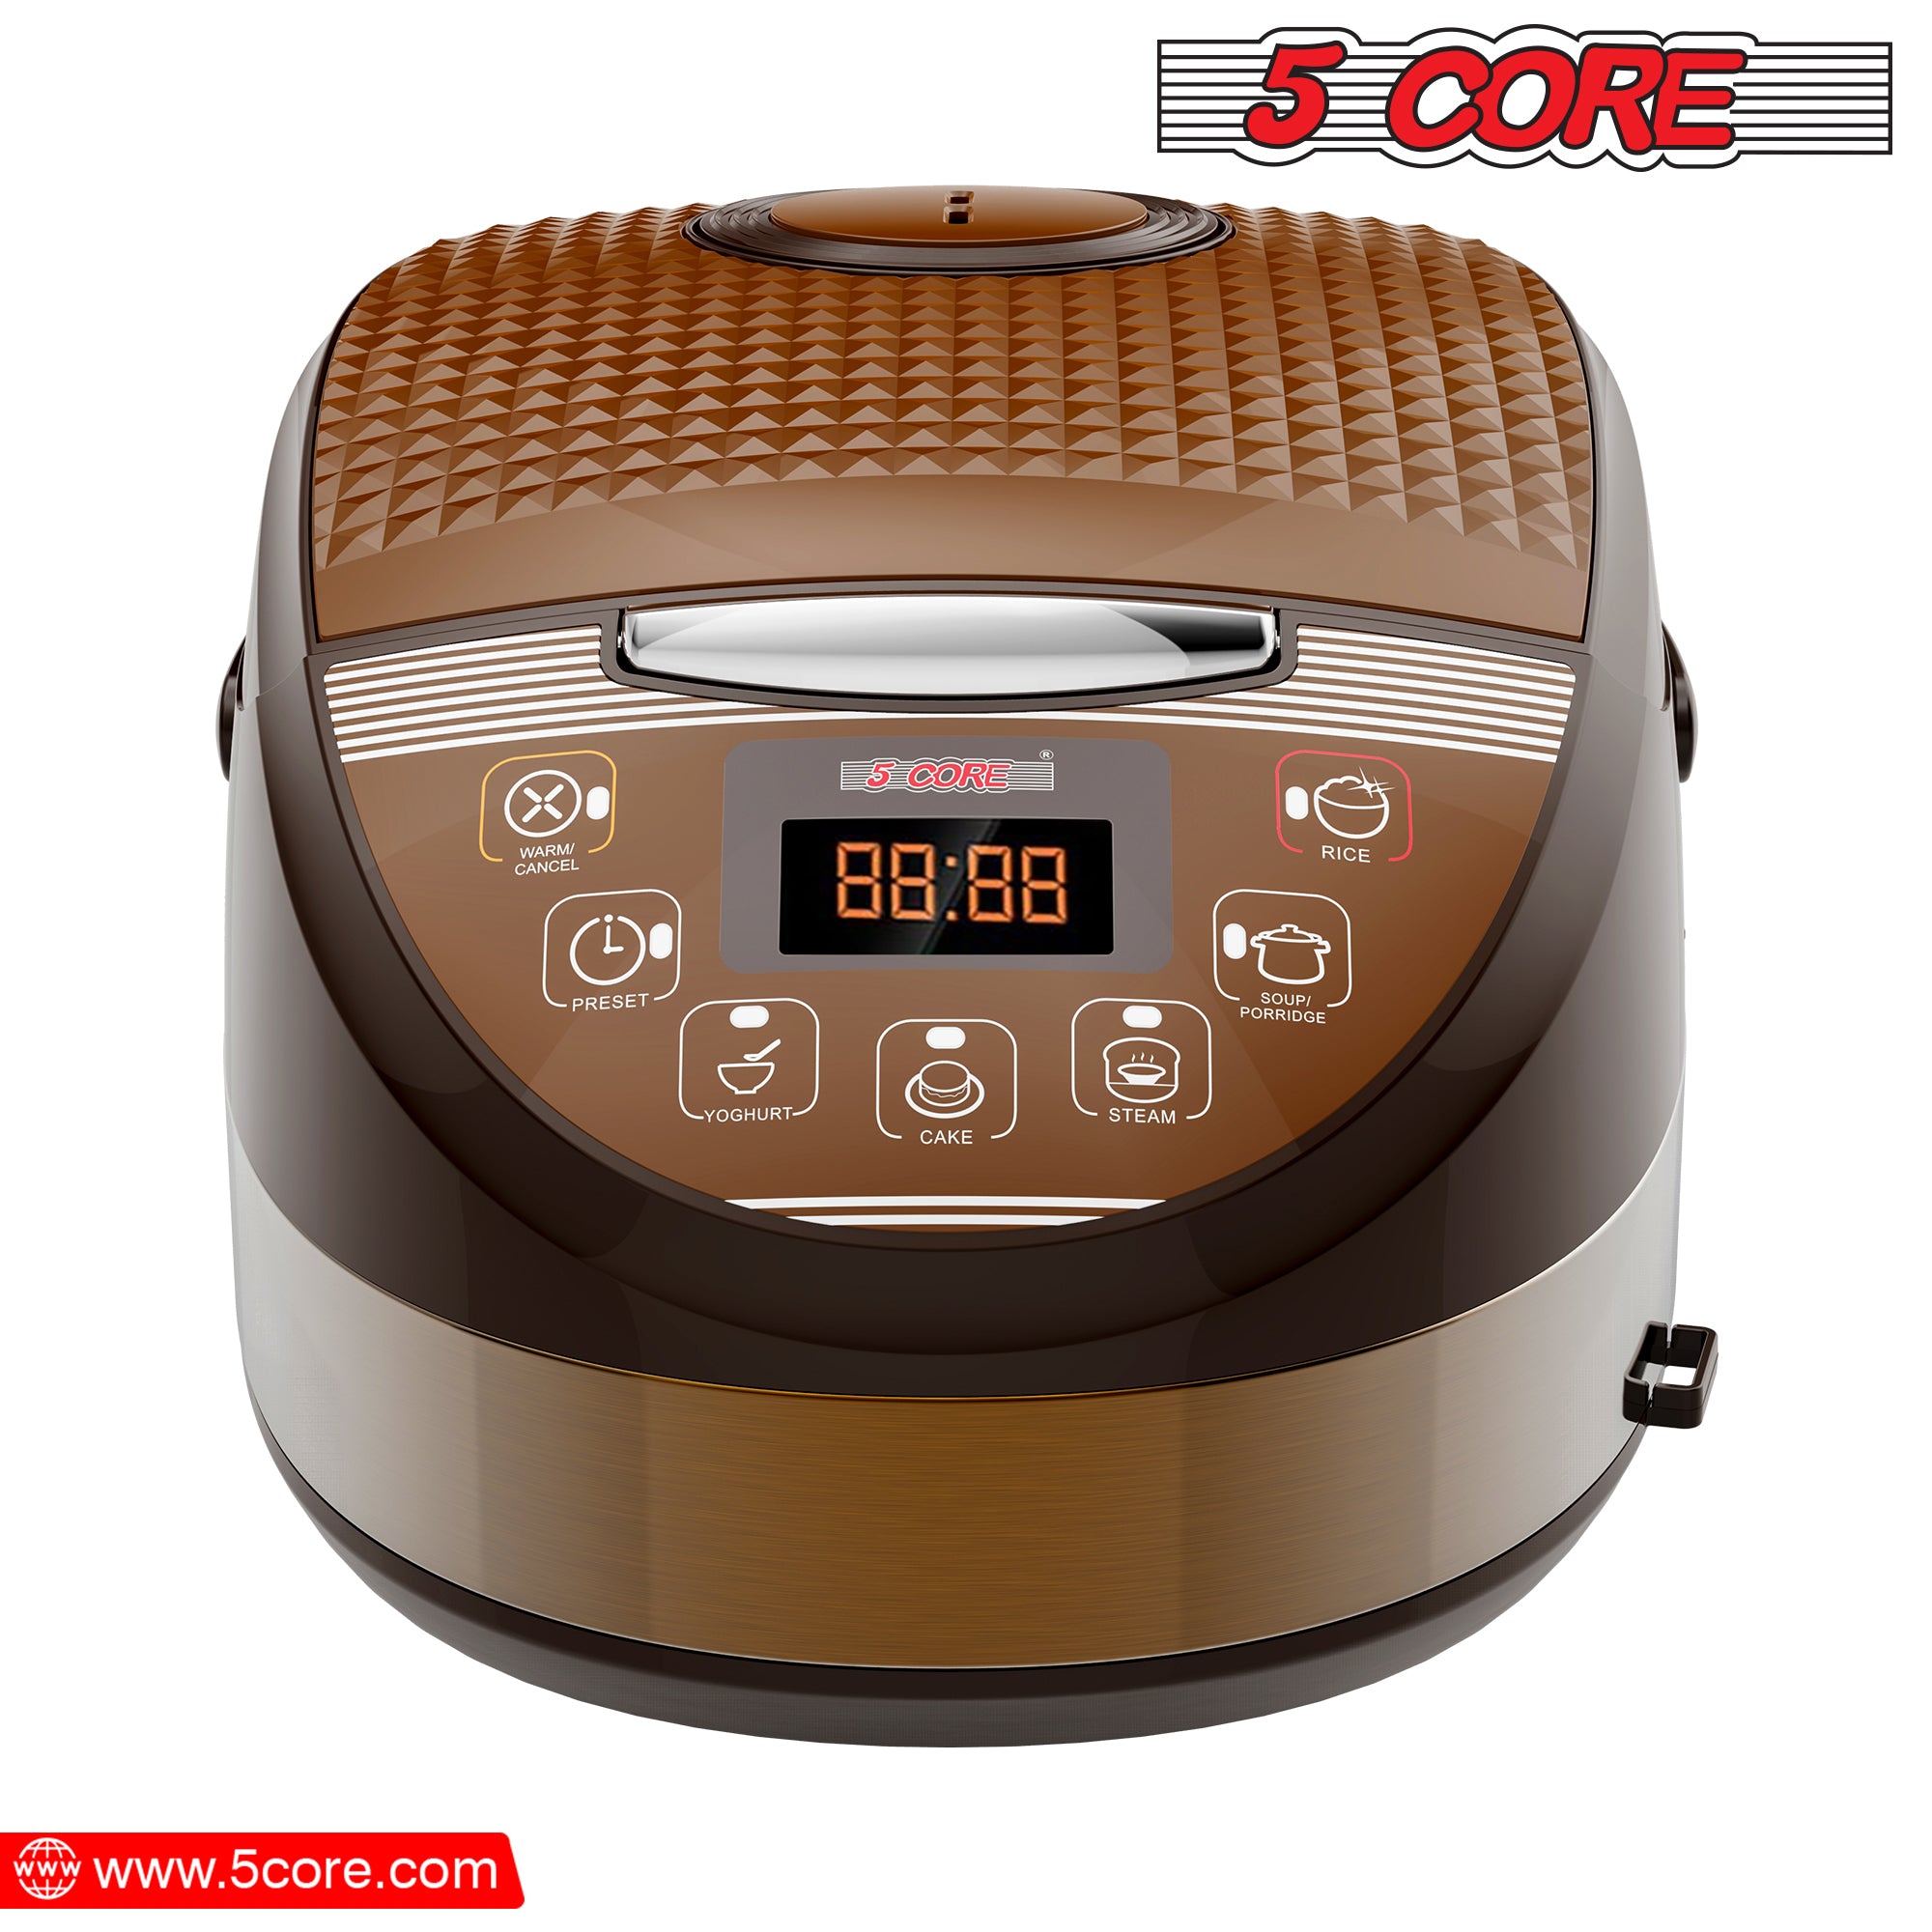 Side perspective of 5 Core's Asian Rice Cooker